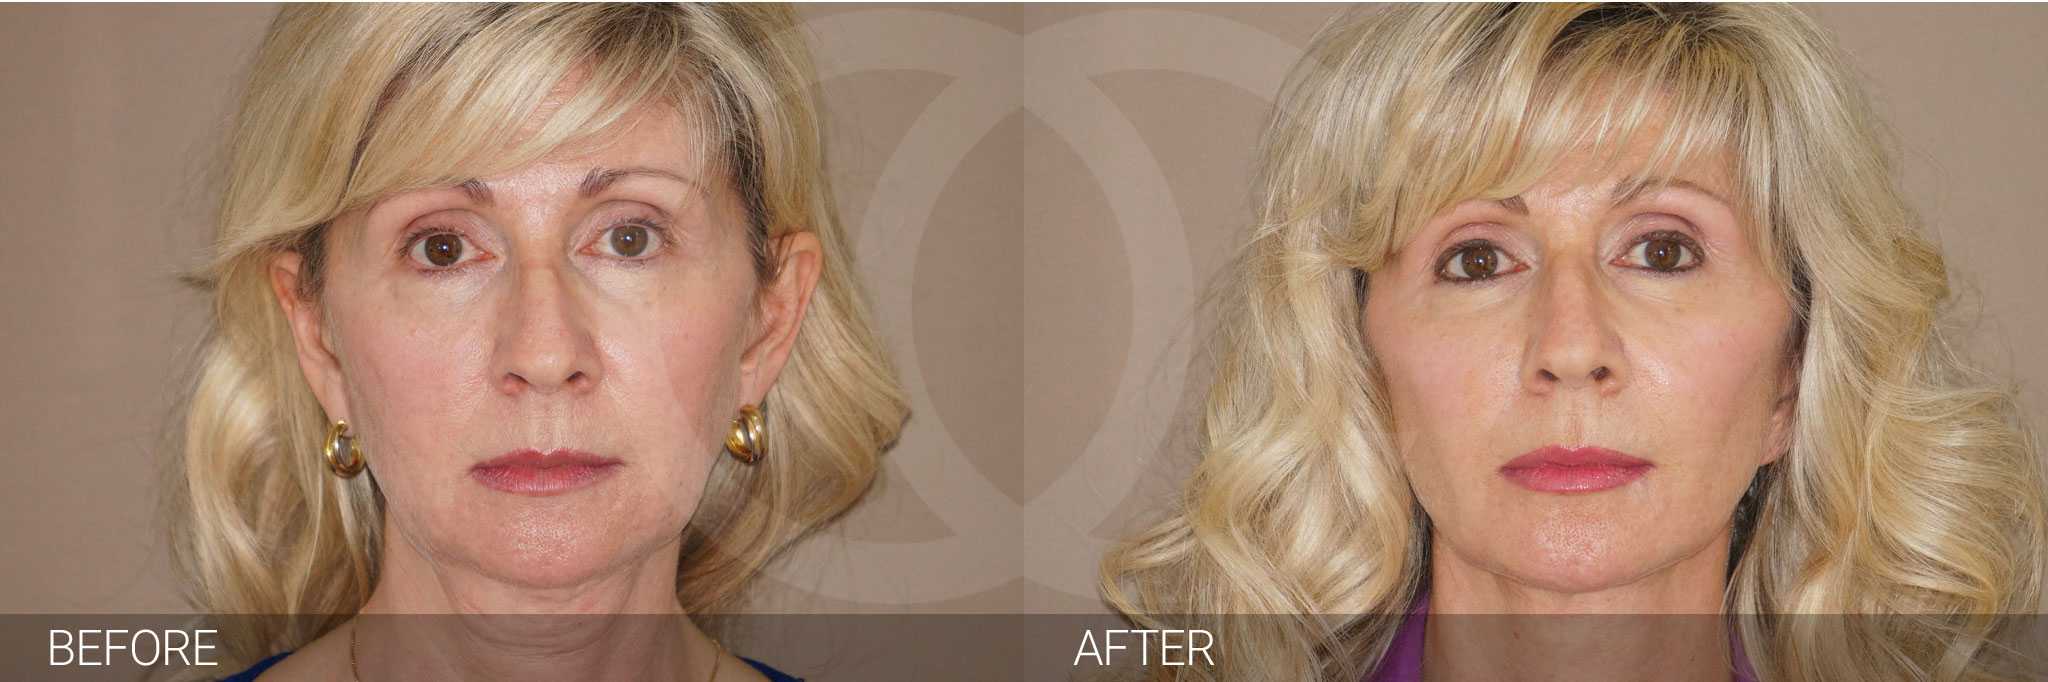 PAVE Facelift and neck lift photo before and after